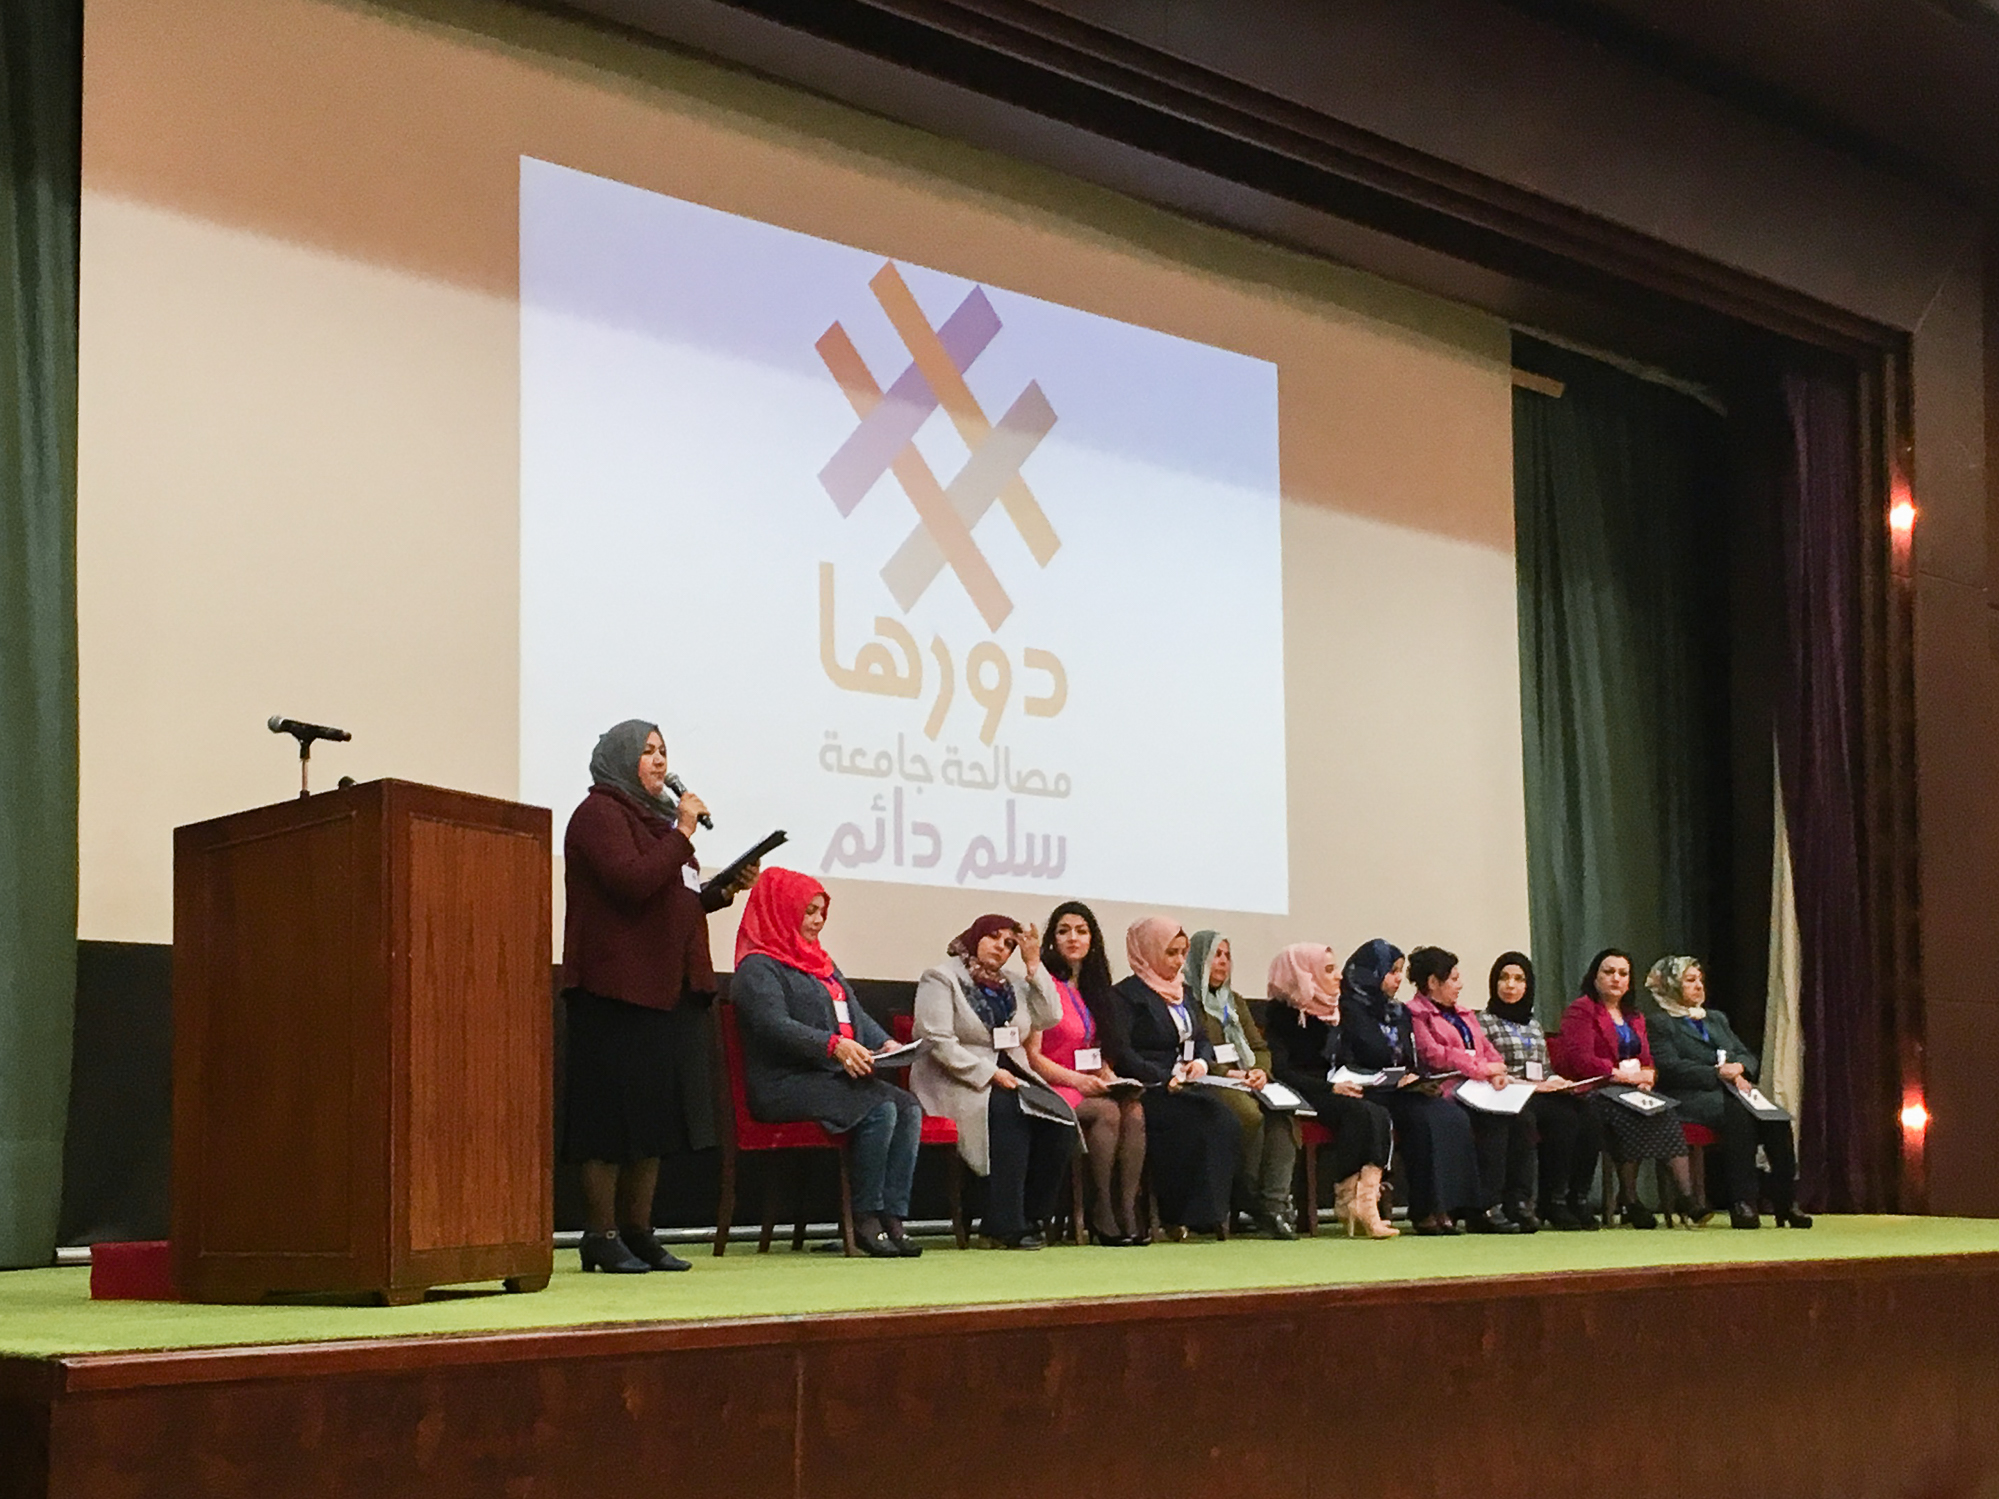 At the Women in Peacebuilding Symposium on December 5, women peace advocates share their ideas with over 200 decision makers from the government, civil society, and international organizations.